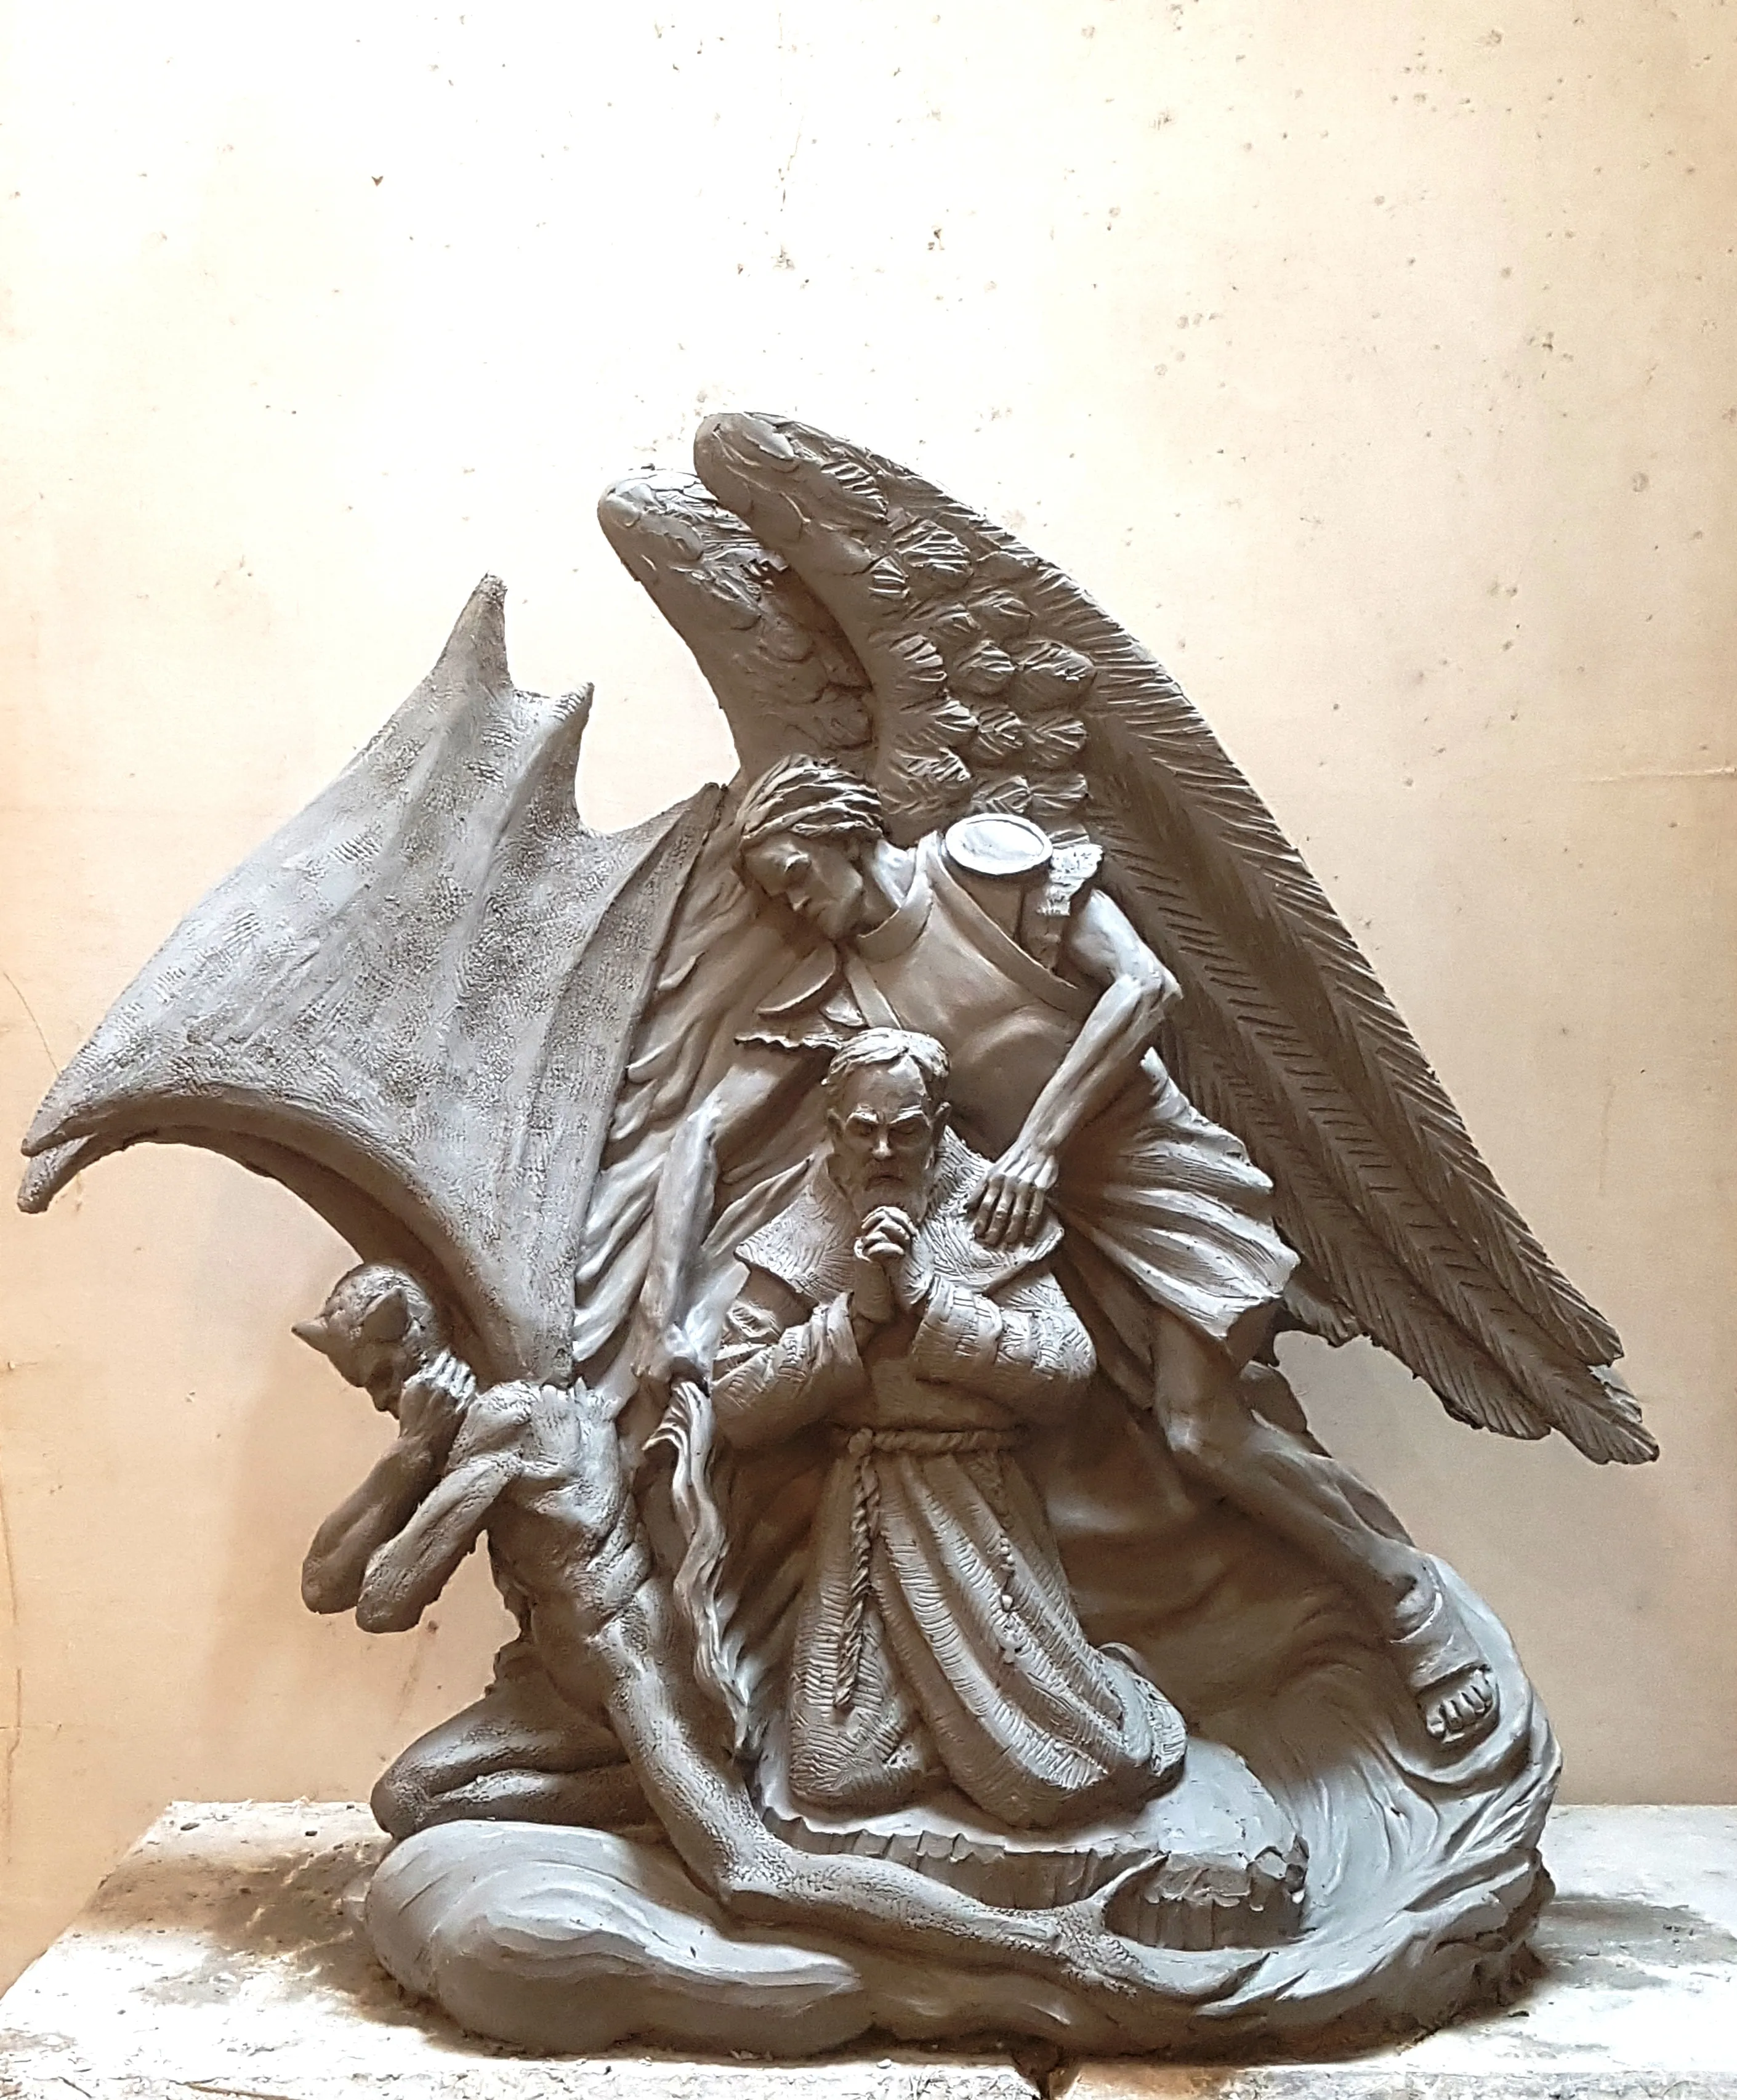 Artist Timothy P. Schmalz's sculpture depicts St. Michael the Archangel protecting Padre Pio, as he kneels in prayer, from a demon. Courtesy of Timothy P. Schmalz